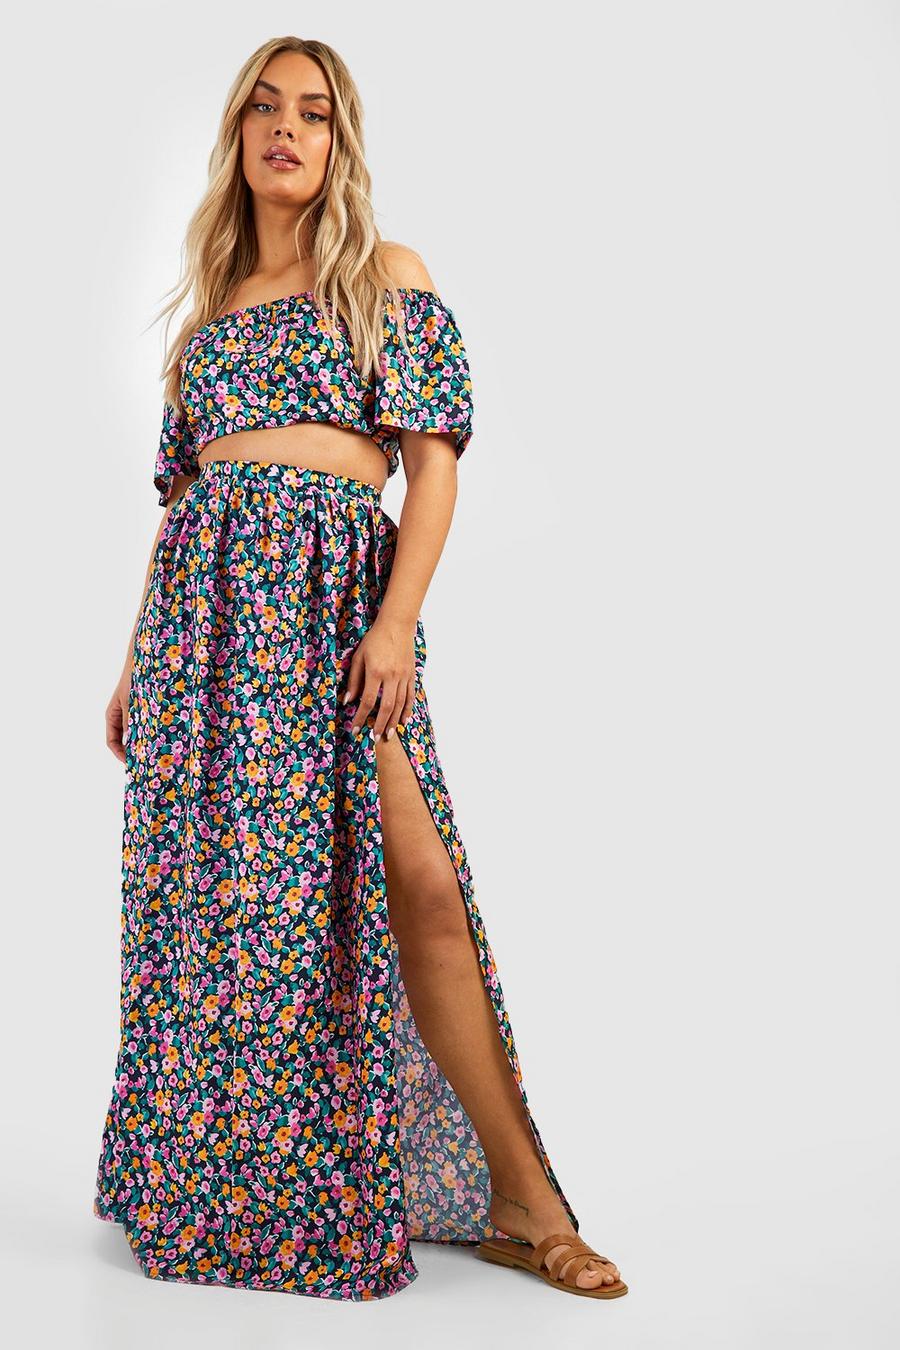 Black Plus Floral Bardot And Skirt Co-ord